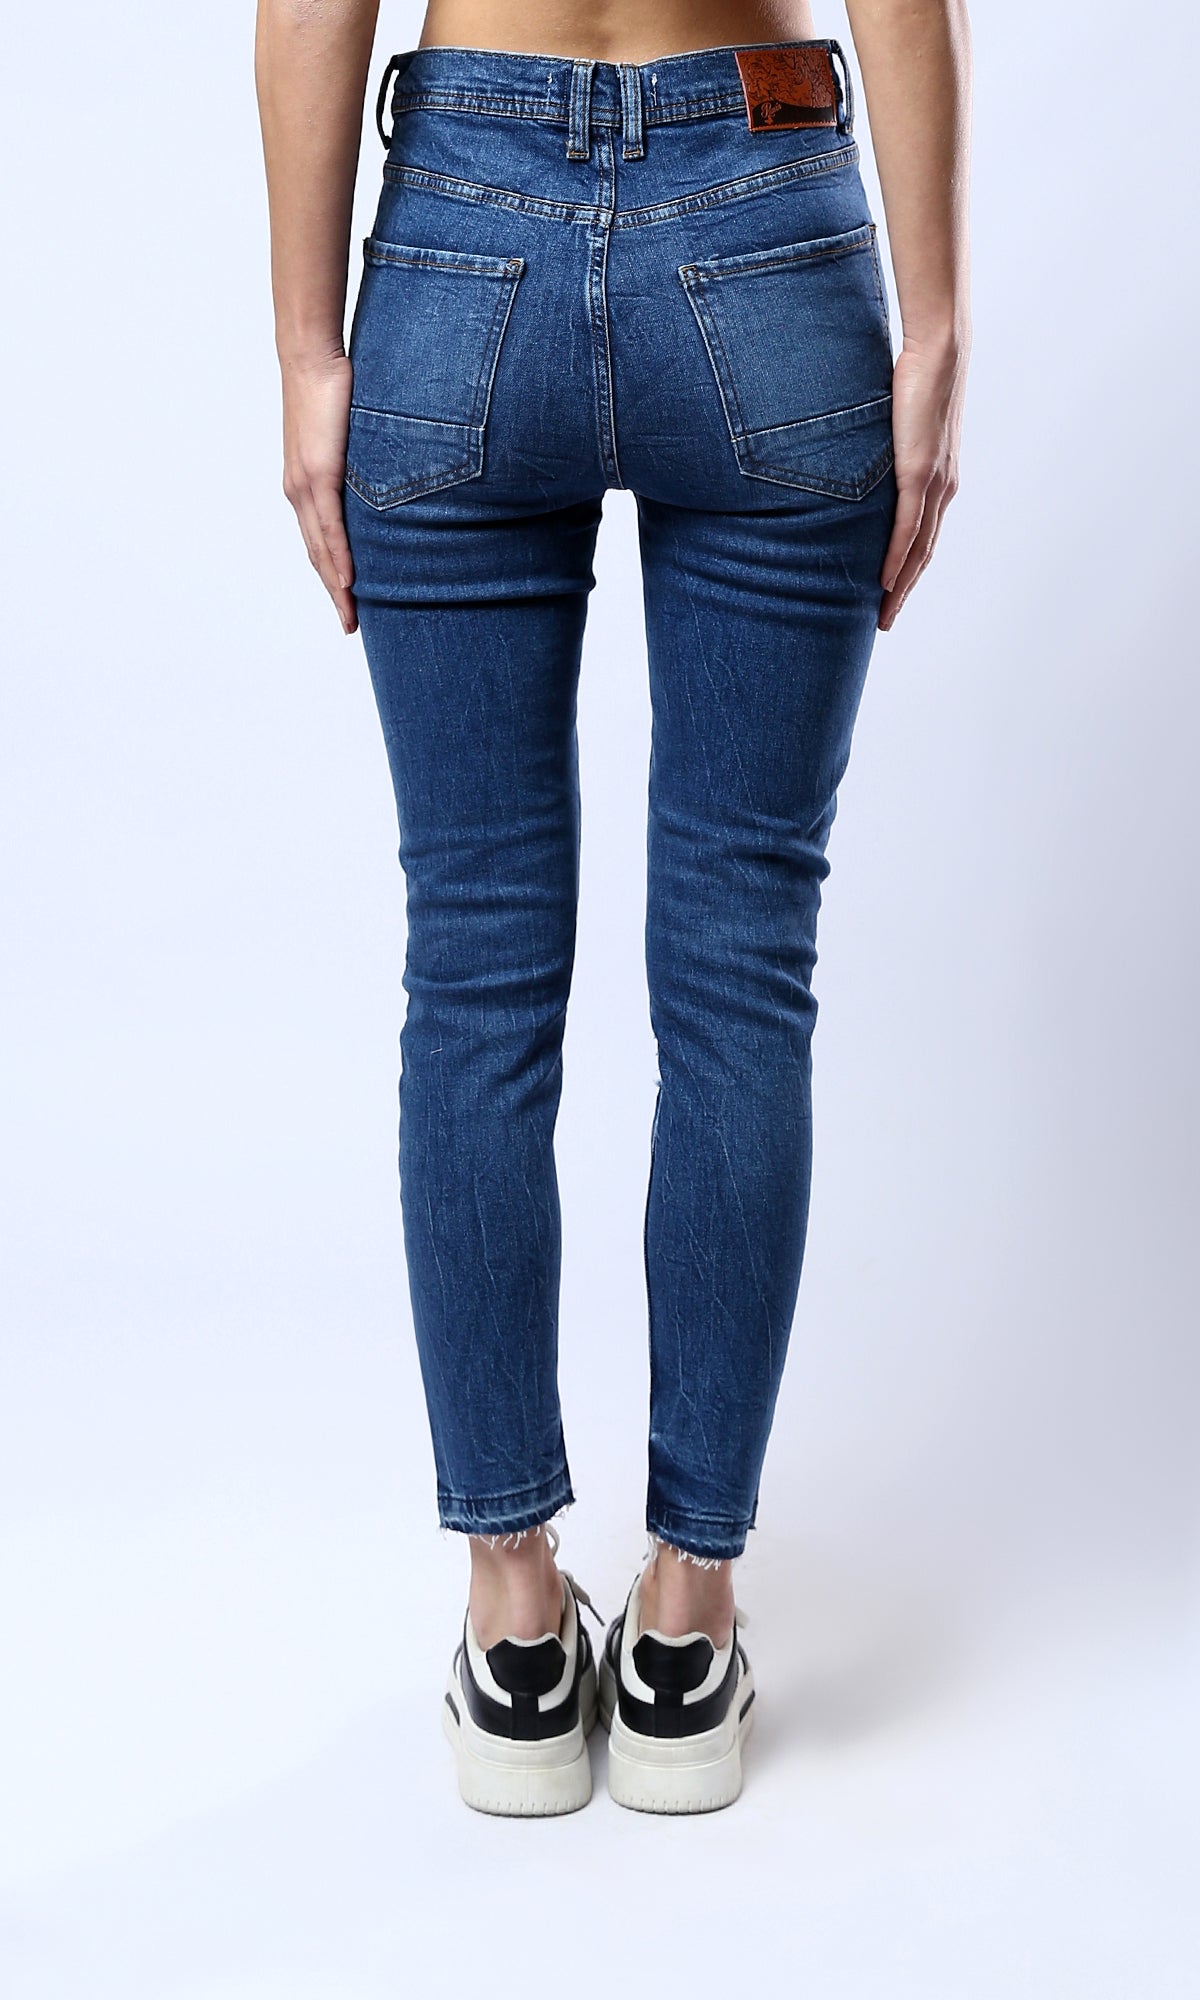 O182218 Cotton Dark Blue Jeans With Multi-Pockets